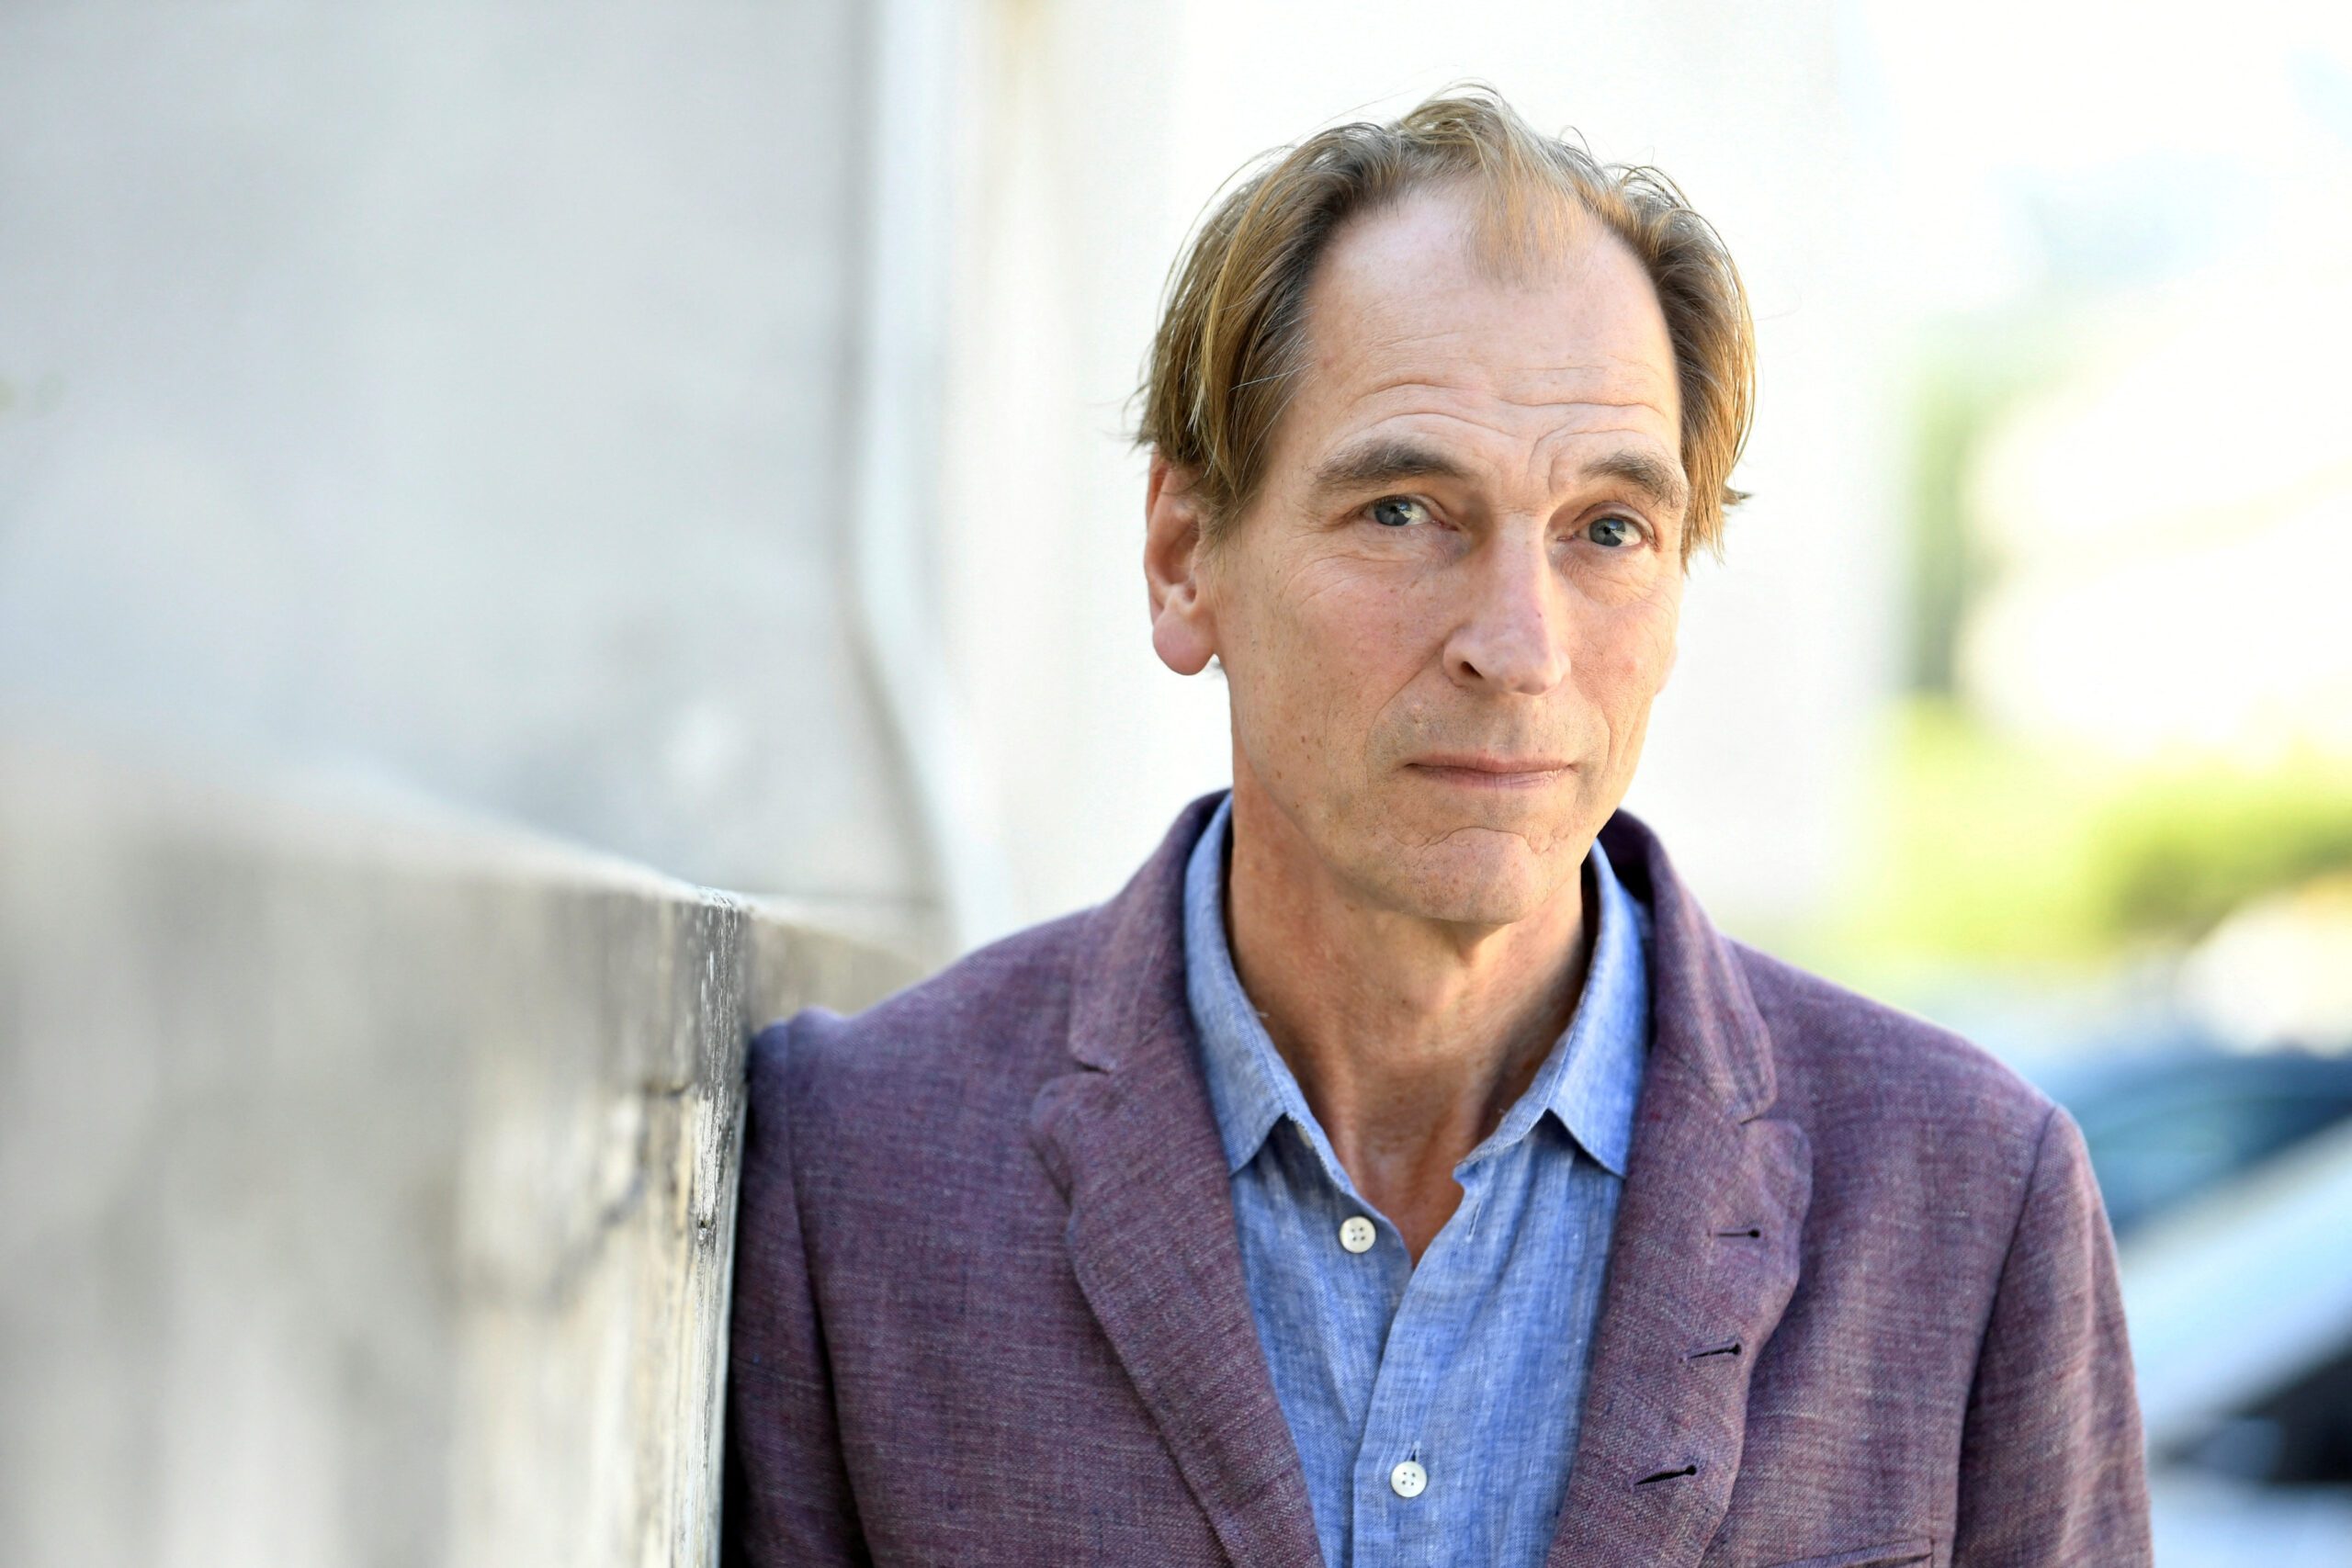 No sign of missing actor Julian Sands after 6 days gone in California mountains